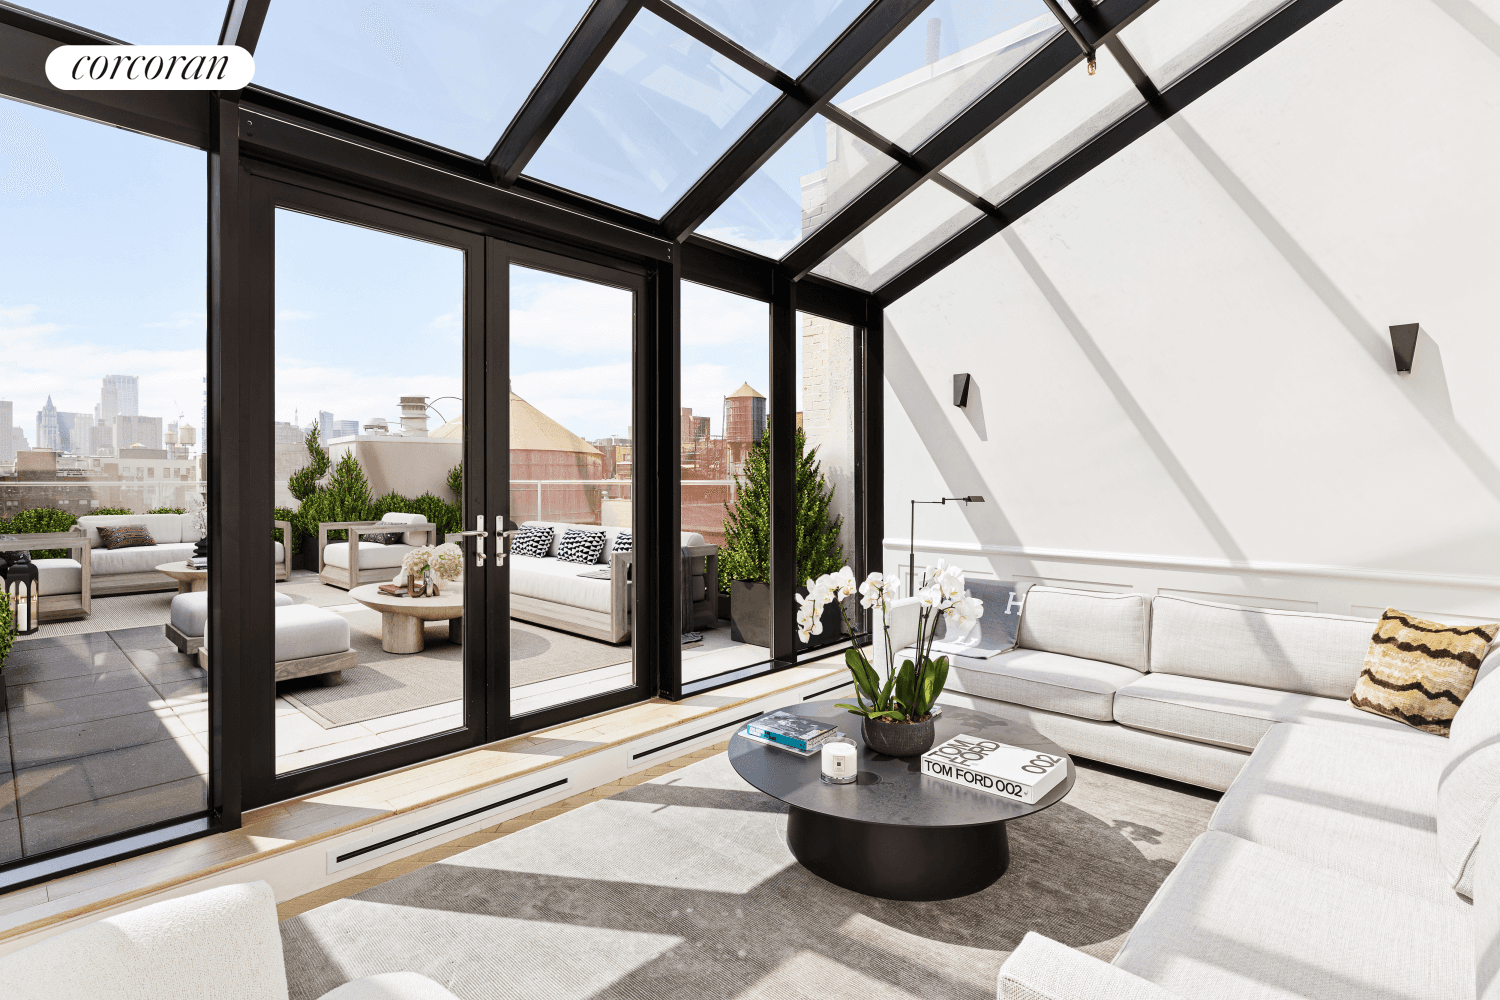 Penthouse 1104 at 14th East 4th Street The Silk Building Three Bedrooms Three Bathrooms Powder room 2, 145 sqft interior 553 sqft private terrace aprox Welcome to Penthouse 1104 at ...